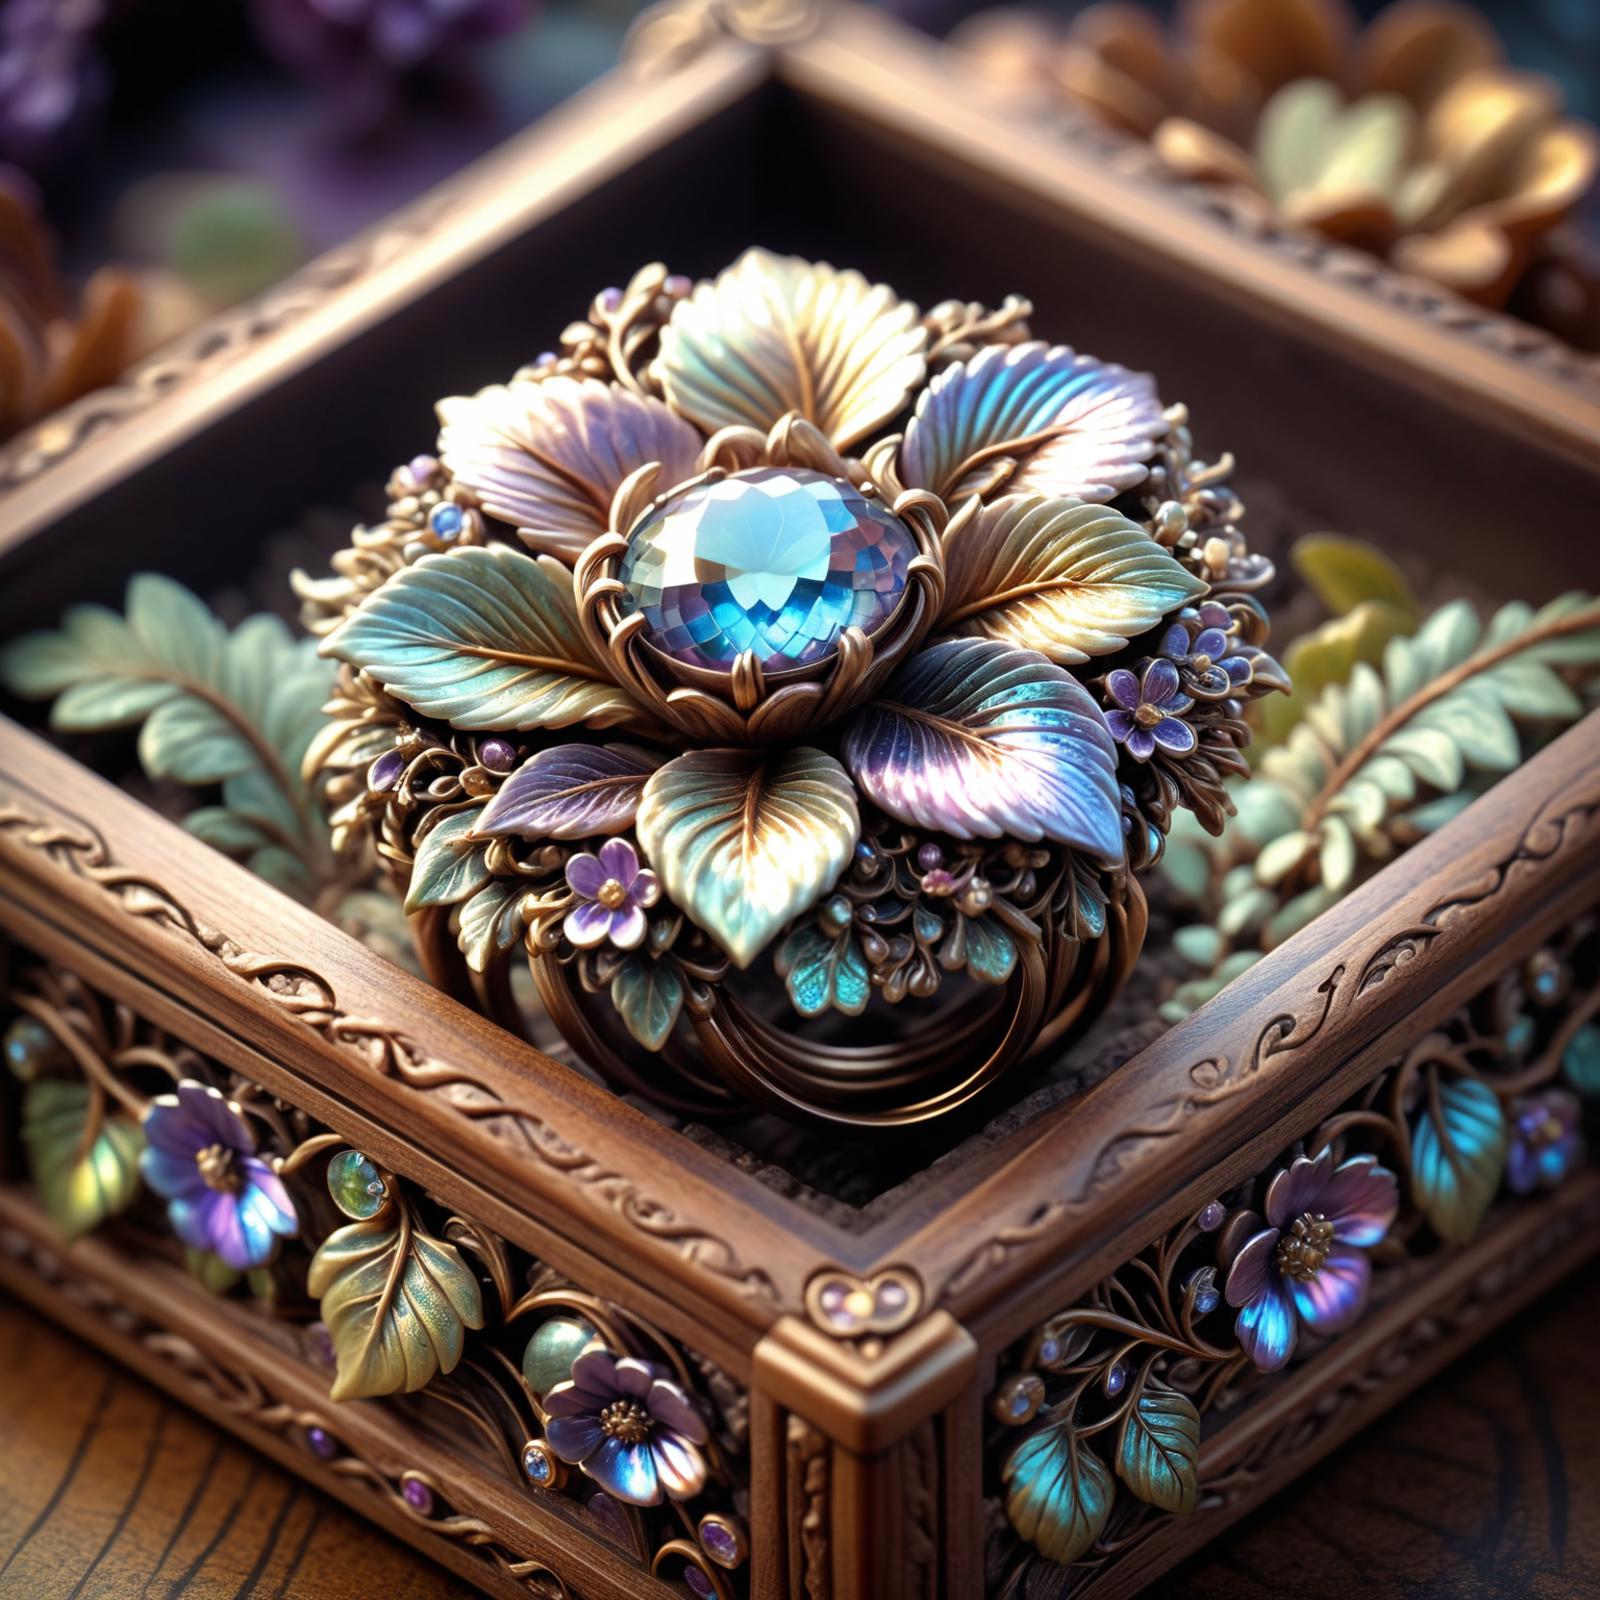 A decorative box with a flower and a gemstone in it.